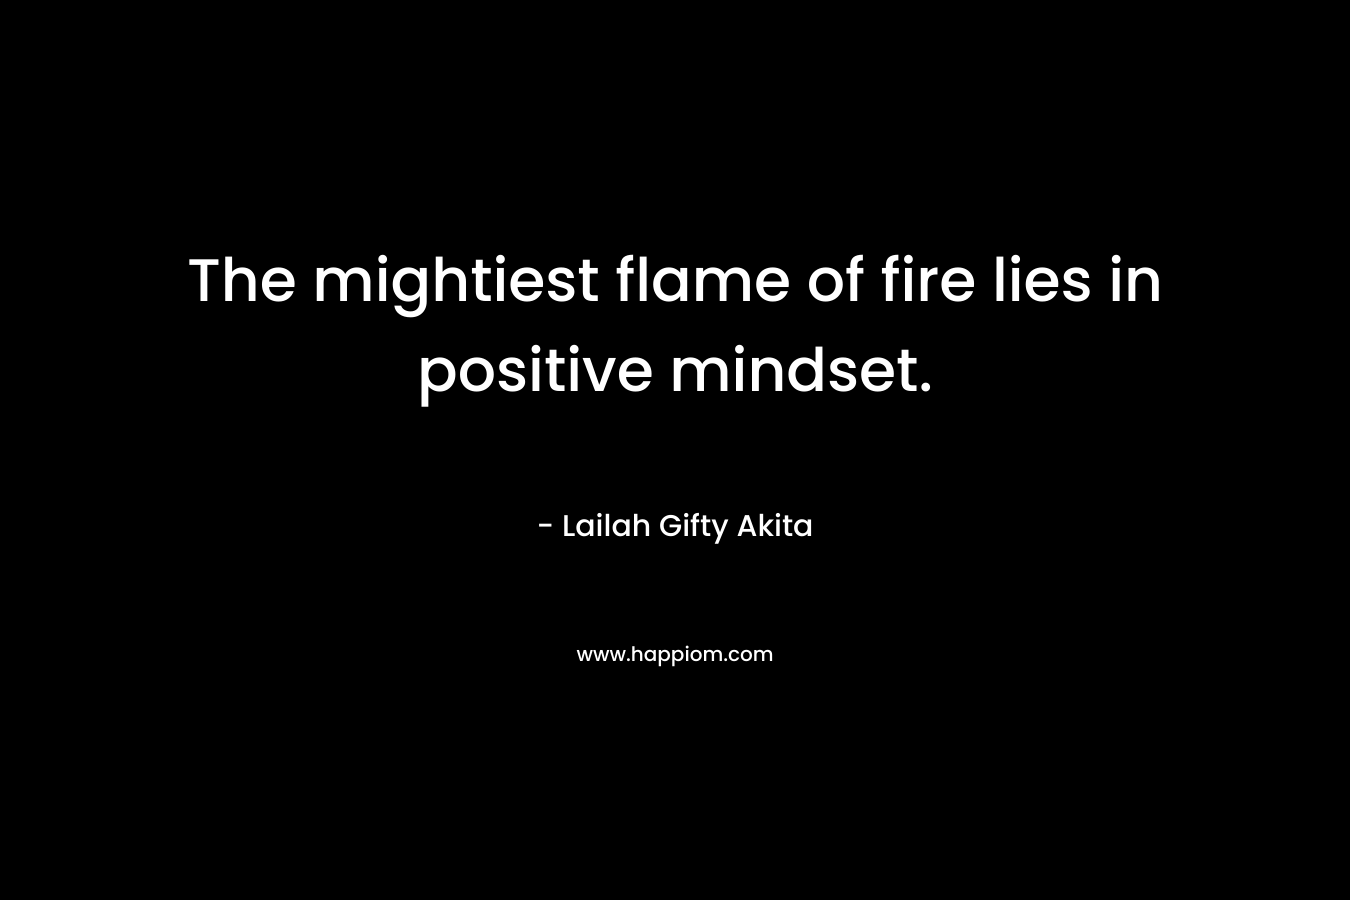 The mightiest flame of fire lies in positive mindset. – Lailah Gifty Akita